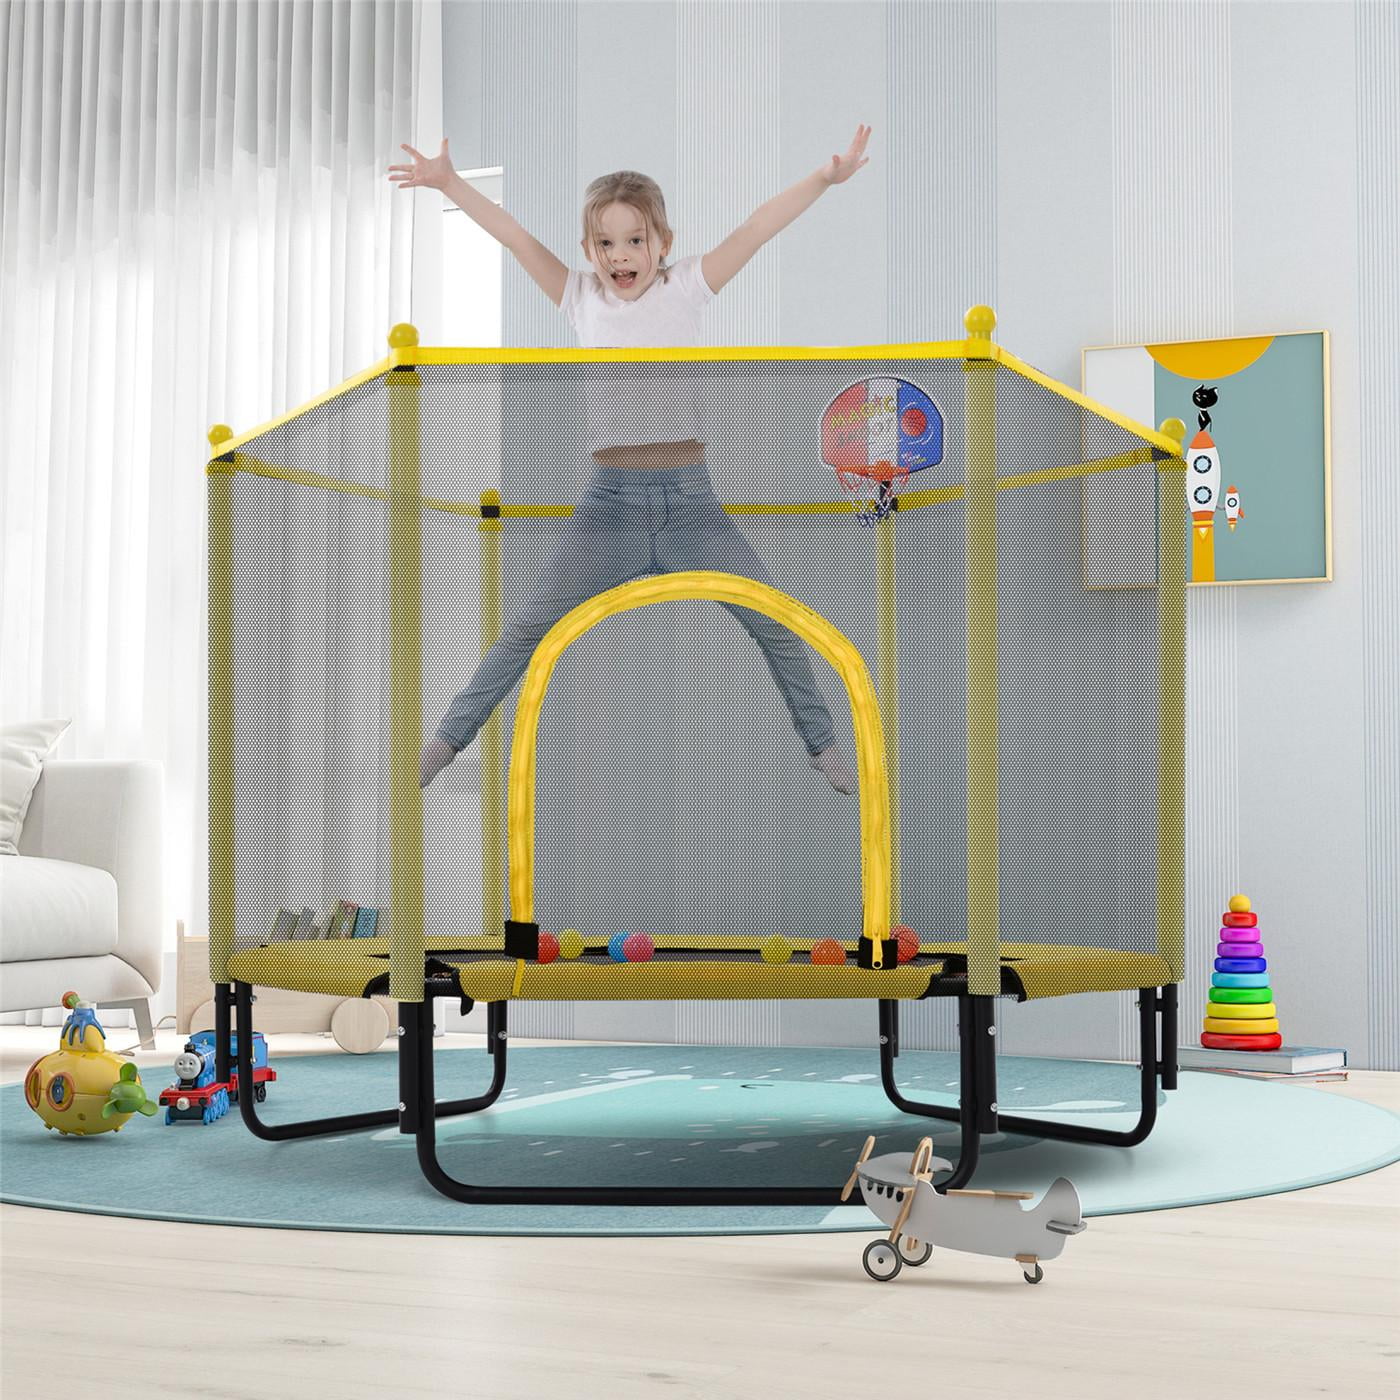 60'' Trampoline for Kids - 5ft Outdoor & Indoor Mini Toddler Trampoline with Enclosure, Basketball Hoop, Birthday Gifts for Kids, Gifts for Boy and Girl, Baby Toddler Trampoline Toys, Age 3-12, Yellow